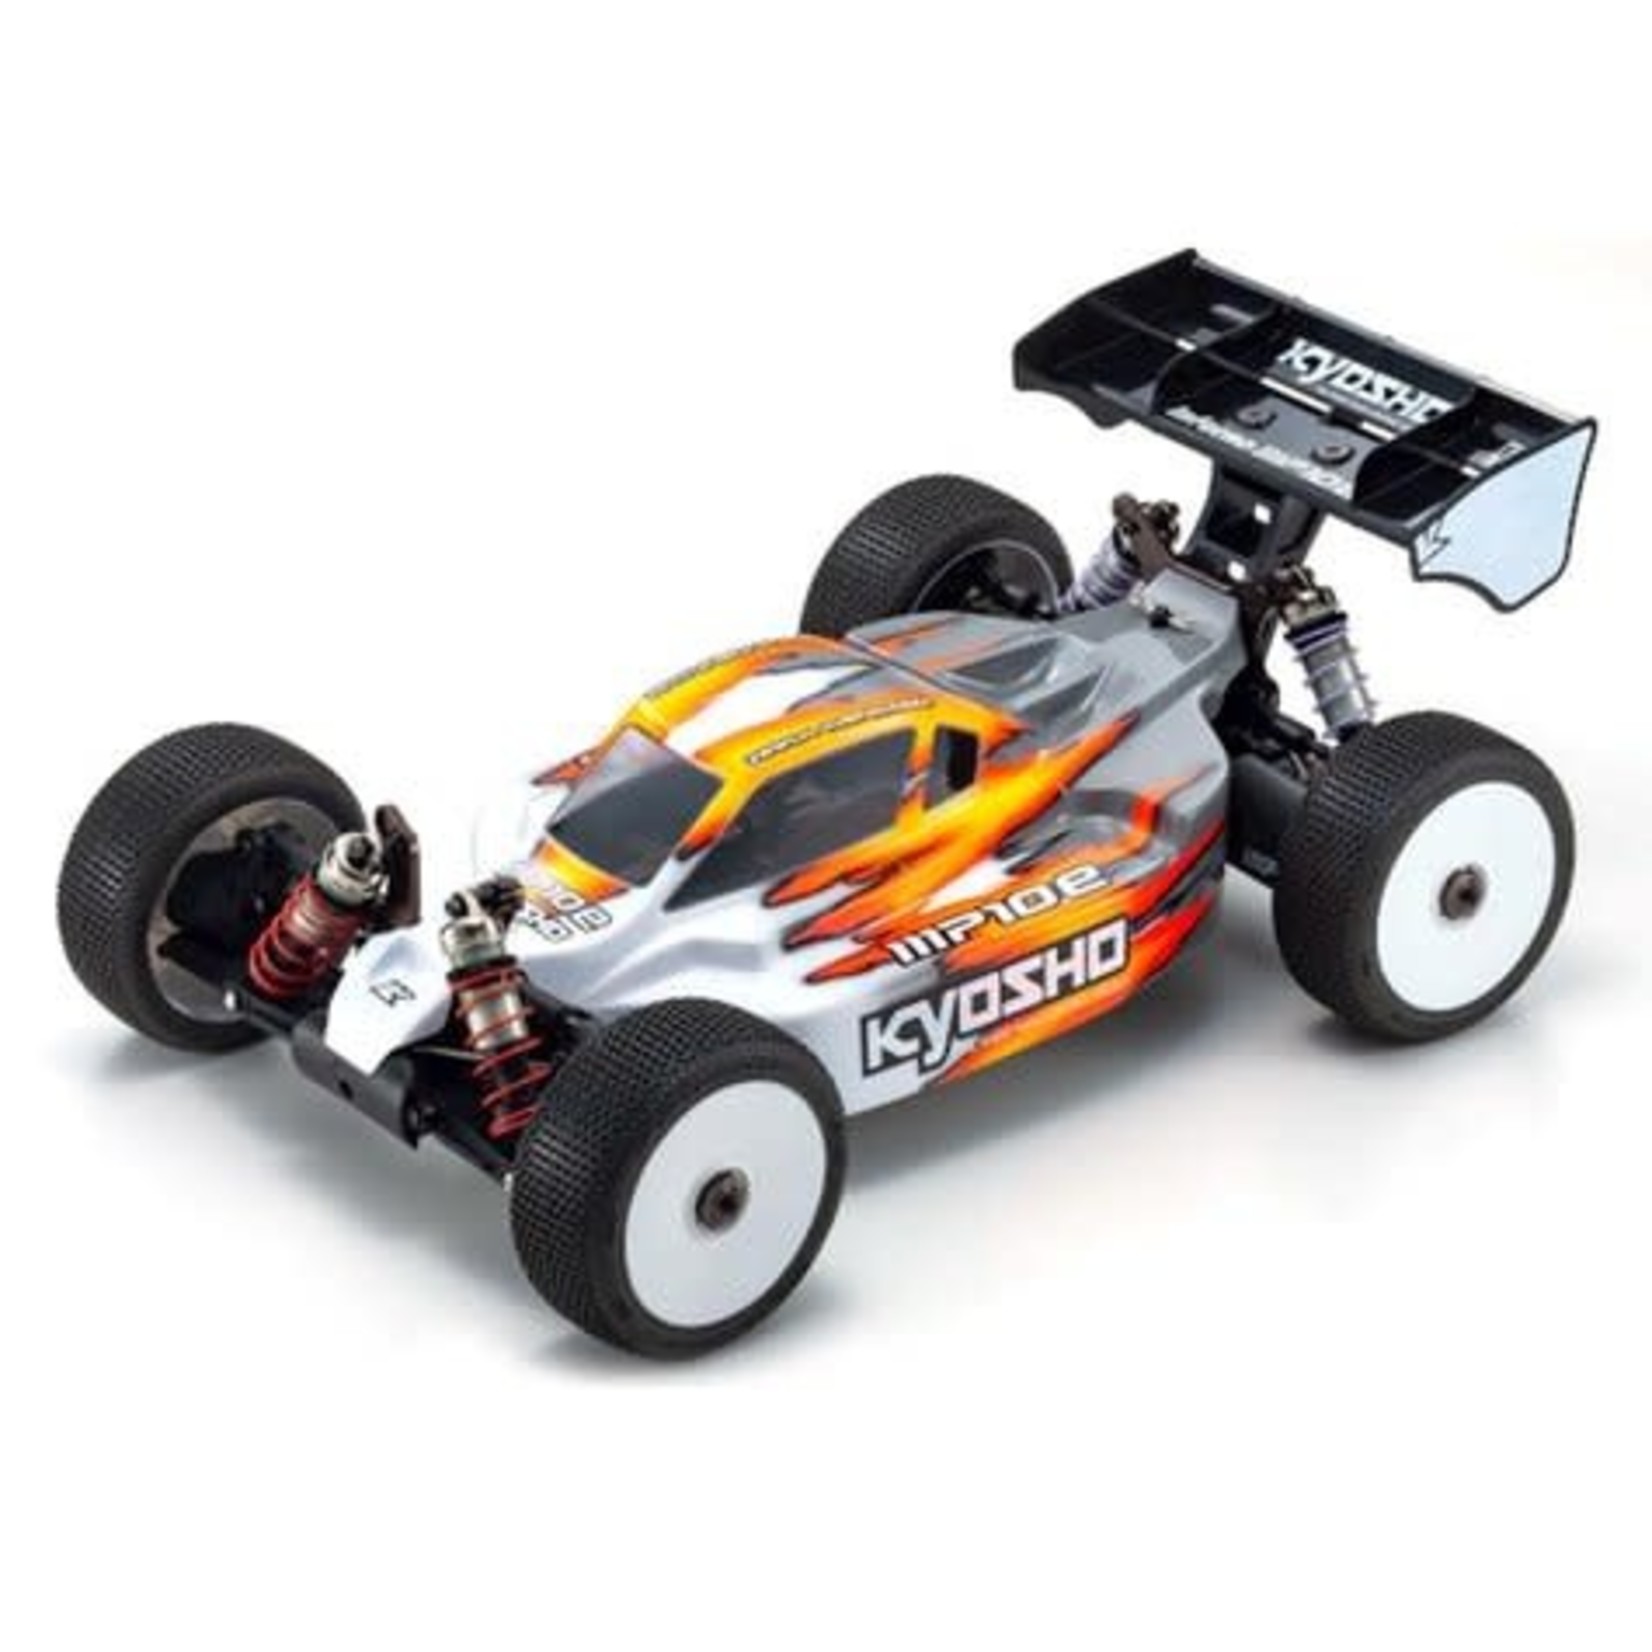 Kyosho Kyosho Inferno MP10e 1/8 Electric 4WD Off-Road Buggy Kit #34110